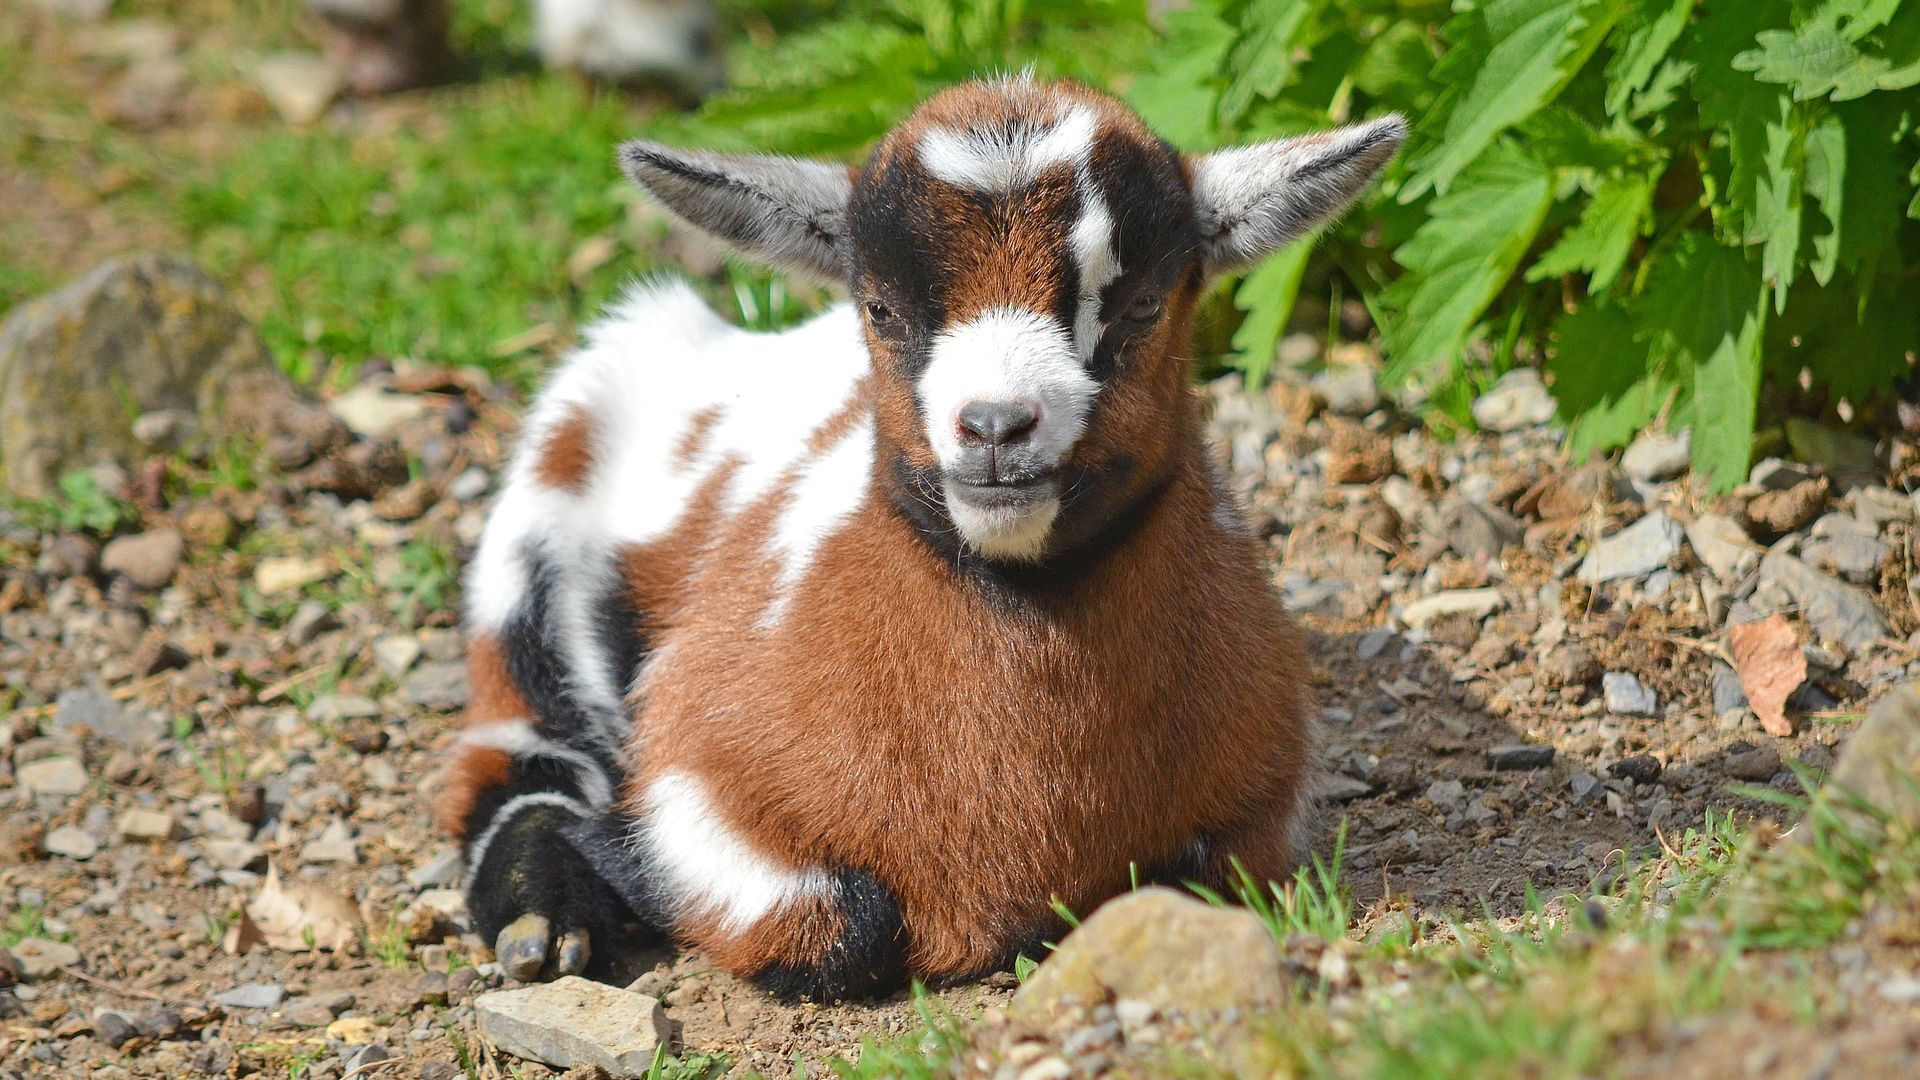 Goat Wallpapers 64 pictures